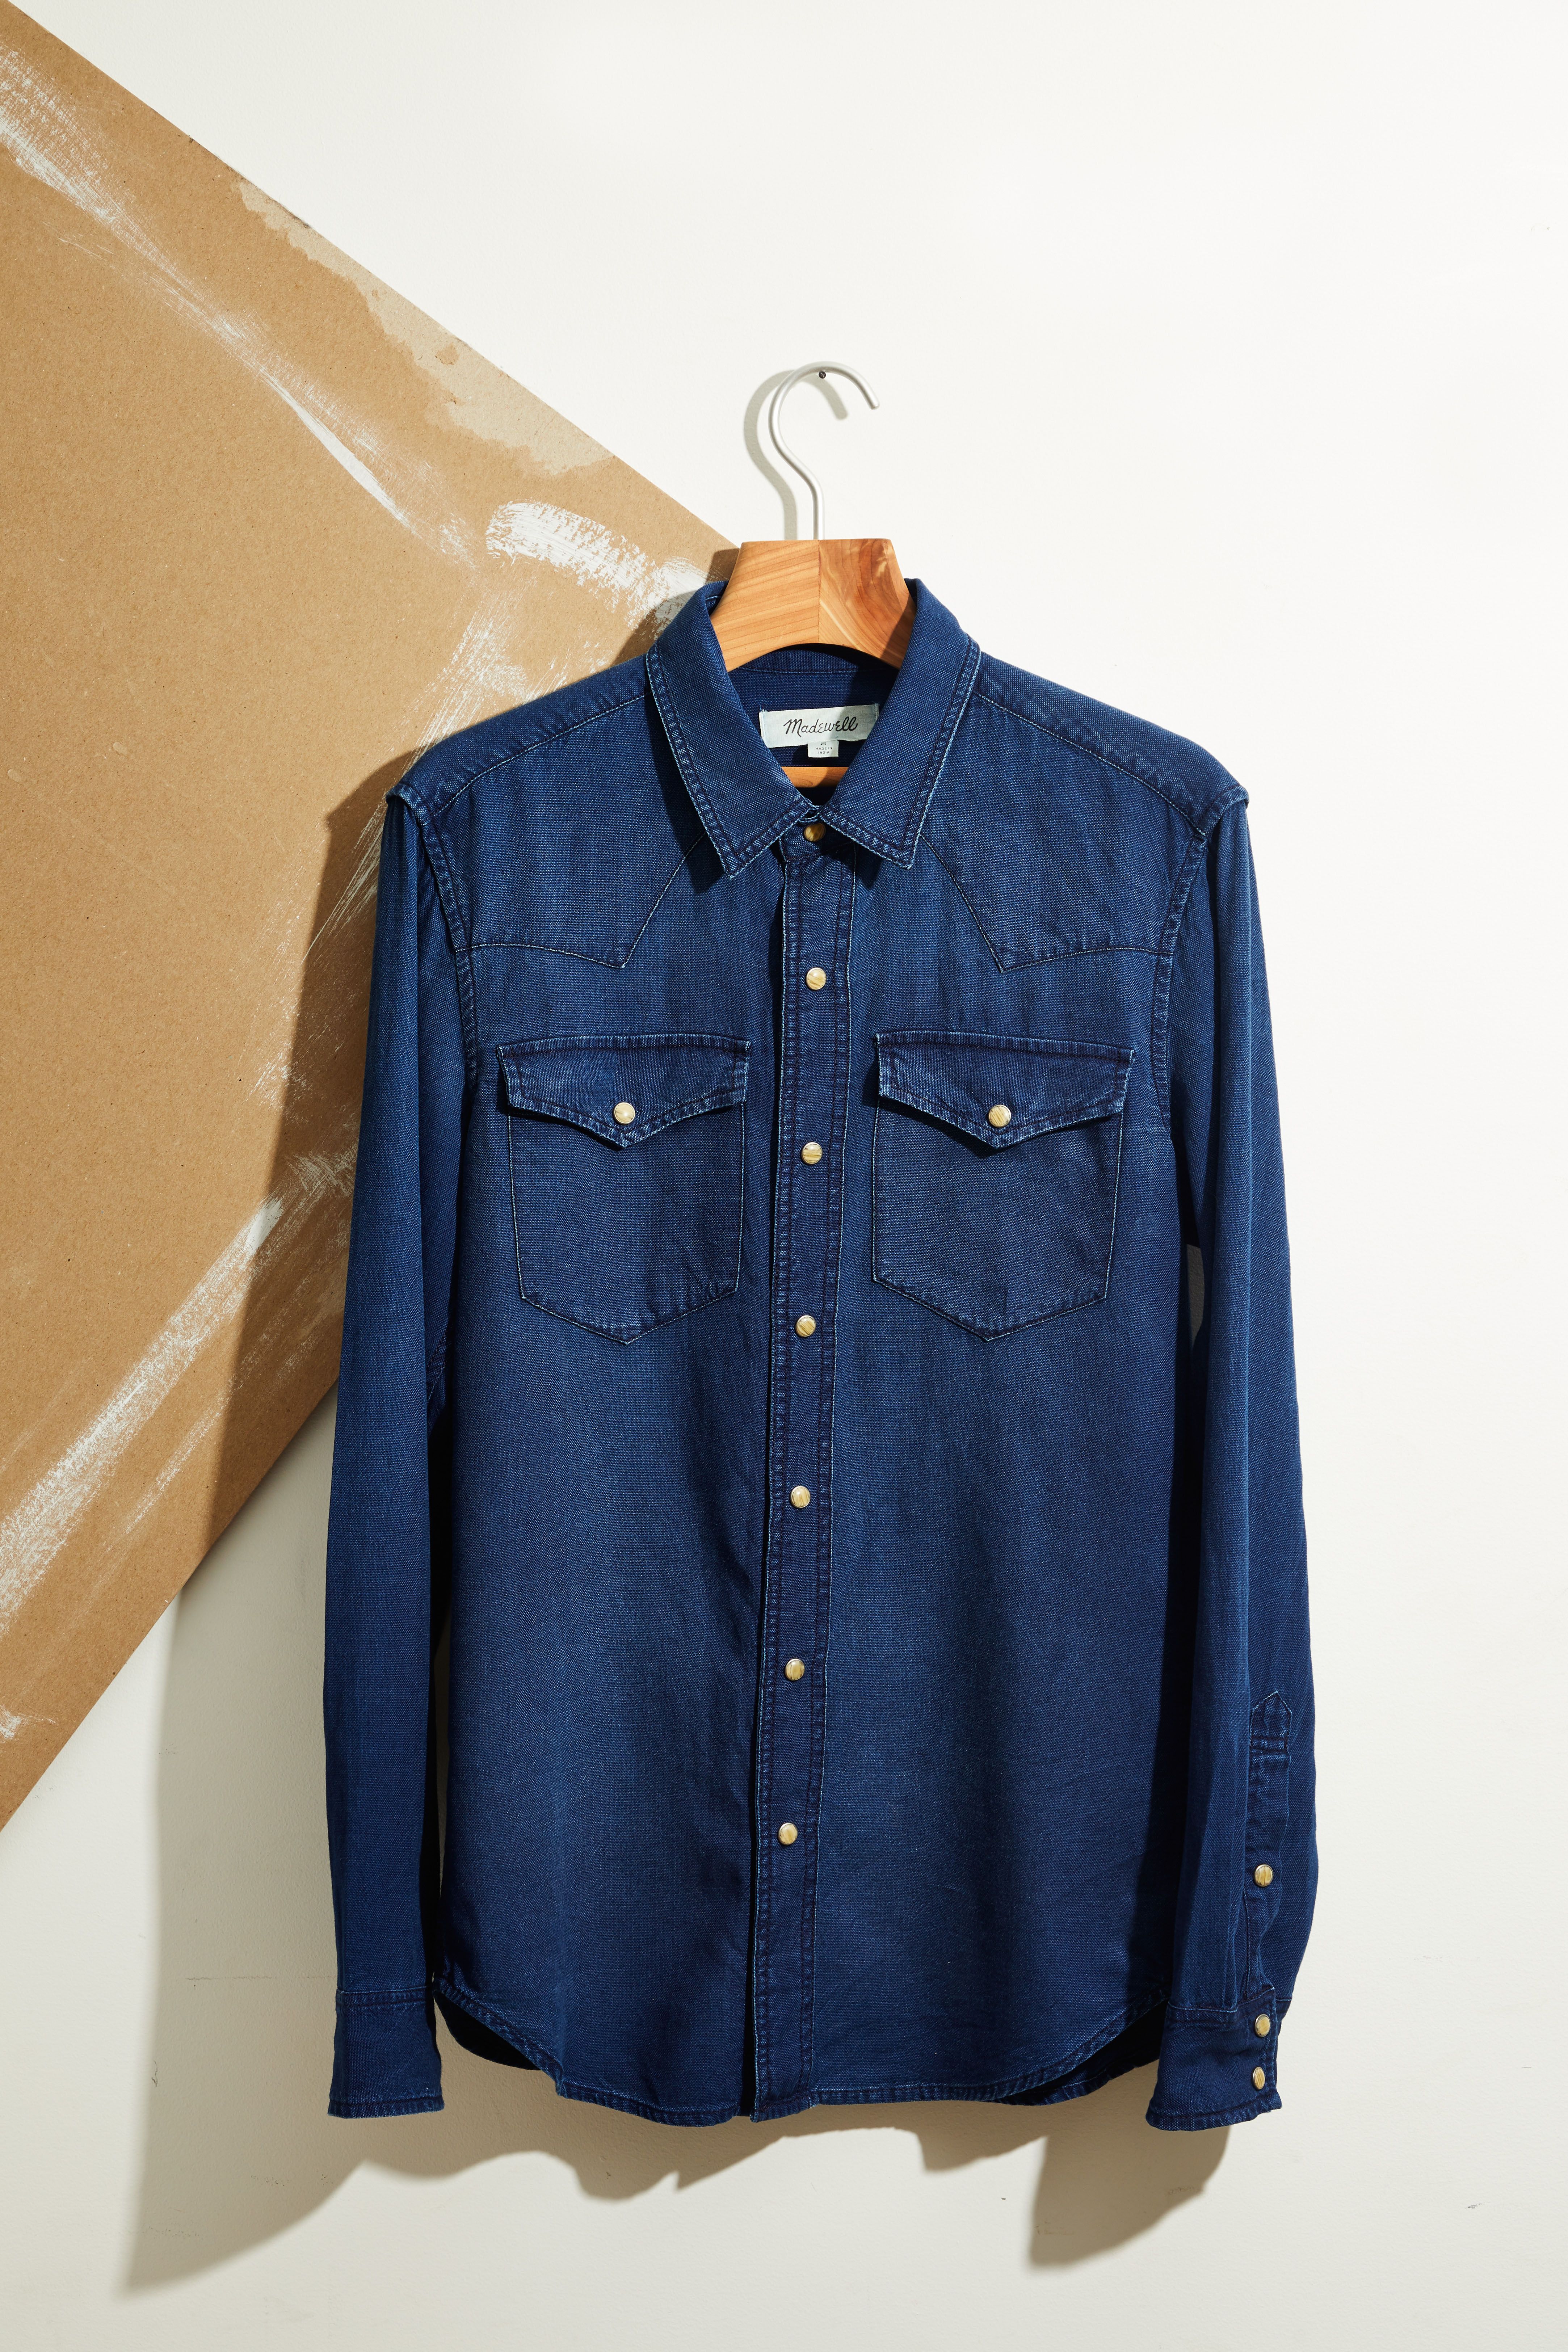 new style jeans shirt